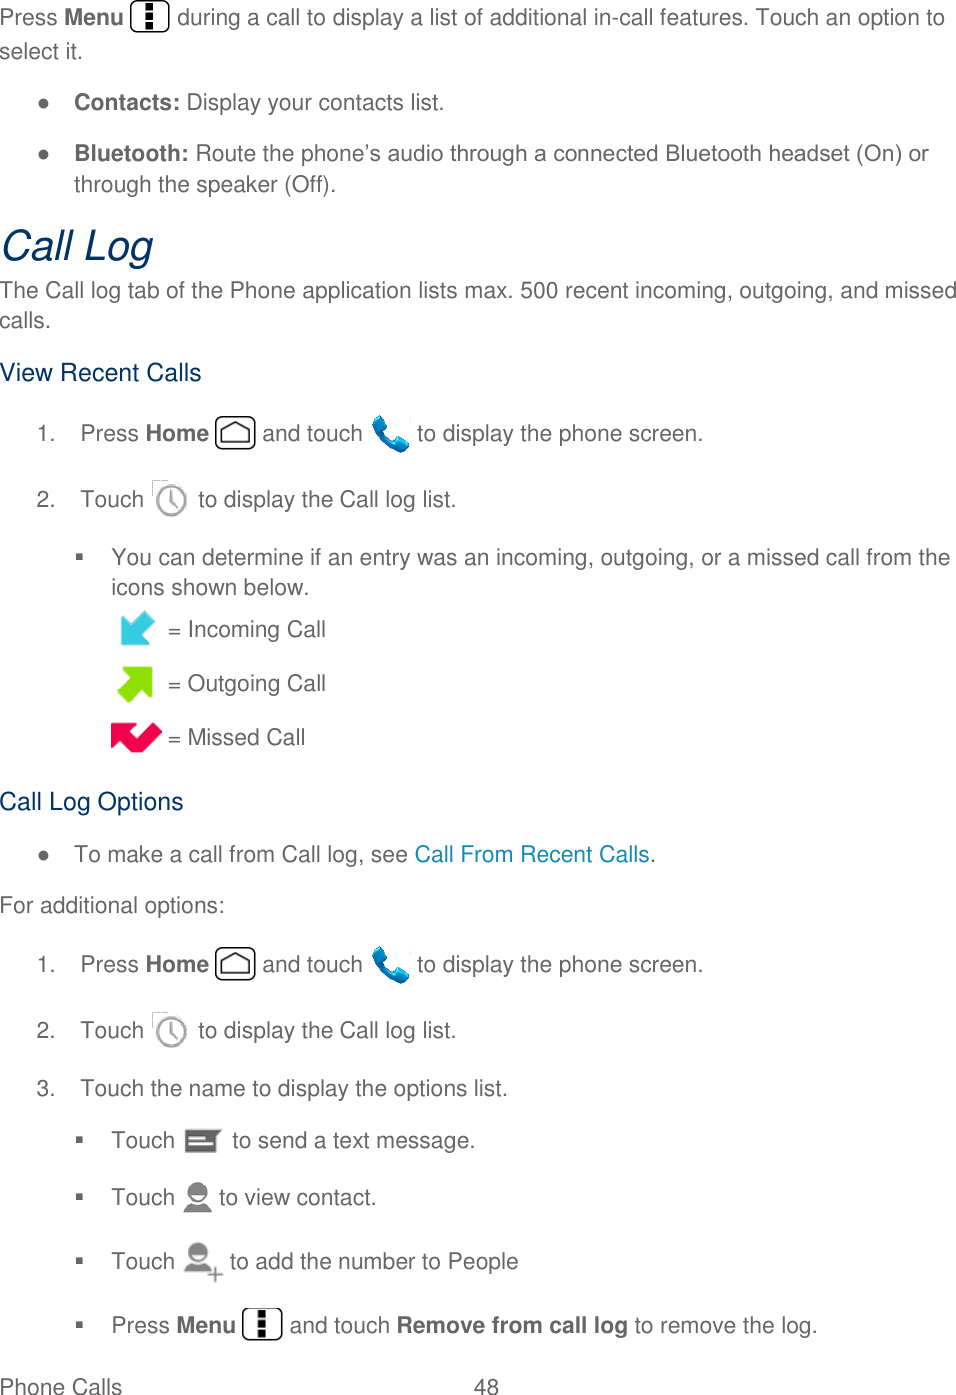  Phone Calls  48   Press Menu   during a call to display a list of additional in-call features. Touch an option to select it.  ● Contacts: Display your contacts list. ● Bluetooth: Route the phone’s audio through a connected Bluetooth headset (On) or through the speaker (Off).  Call Log The Call log tab of the Phone application lists max. 500 recent incoming, outgoing, and missed calls. View Recent Calls 1.  Press Home   and touch   to display the phone screen. 2.  Touch   to display the Call log list.   You can determine if an entry was an incoming, outgoing, or a missed call from the icons shown below.  = Incoming Call  = Outgoing Call  = Missed Call Call Log Options ●  To make a call from Call log, see Call From Recent Calls. For additional options: 1.  Press Home   and touch   to display the phone screen. 2.  Touch   to display the Call log list. 3.  Touch the name to display the options list.   Touch   to send a text message.   Touch   to view contact.   Touch   to add the number to People   Press Menu   and touch Remove from call log to remove the log. 